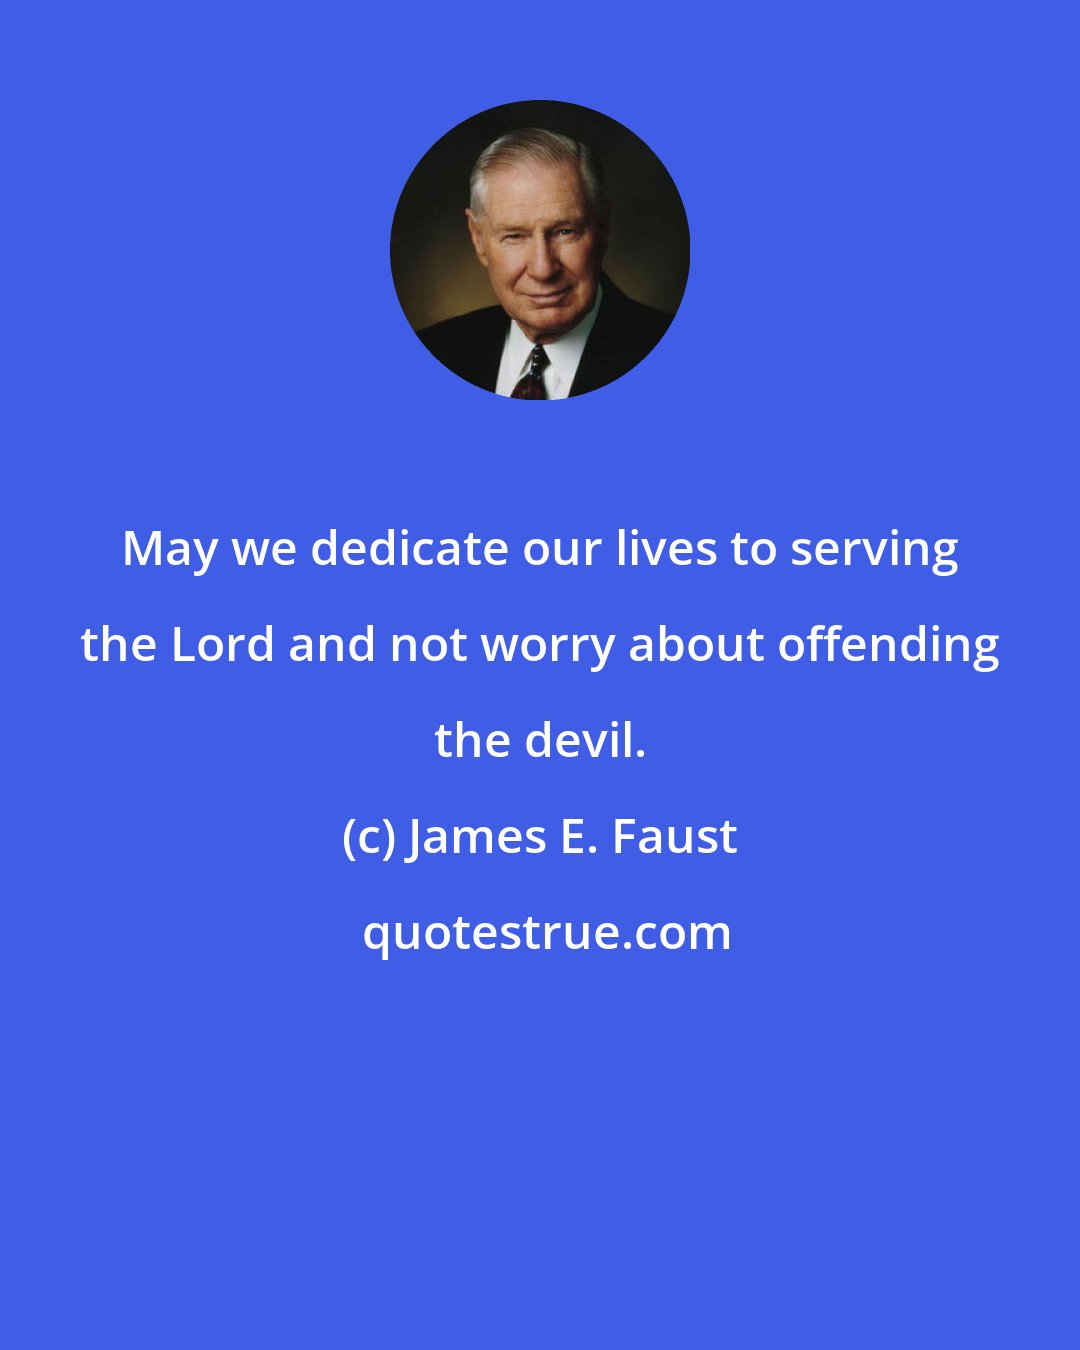 James E. Faust: May we dedicate our lives to serving the Lord and not worry about offending the devil.